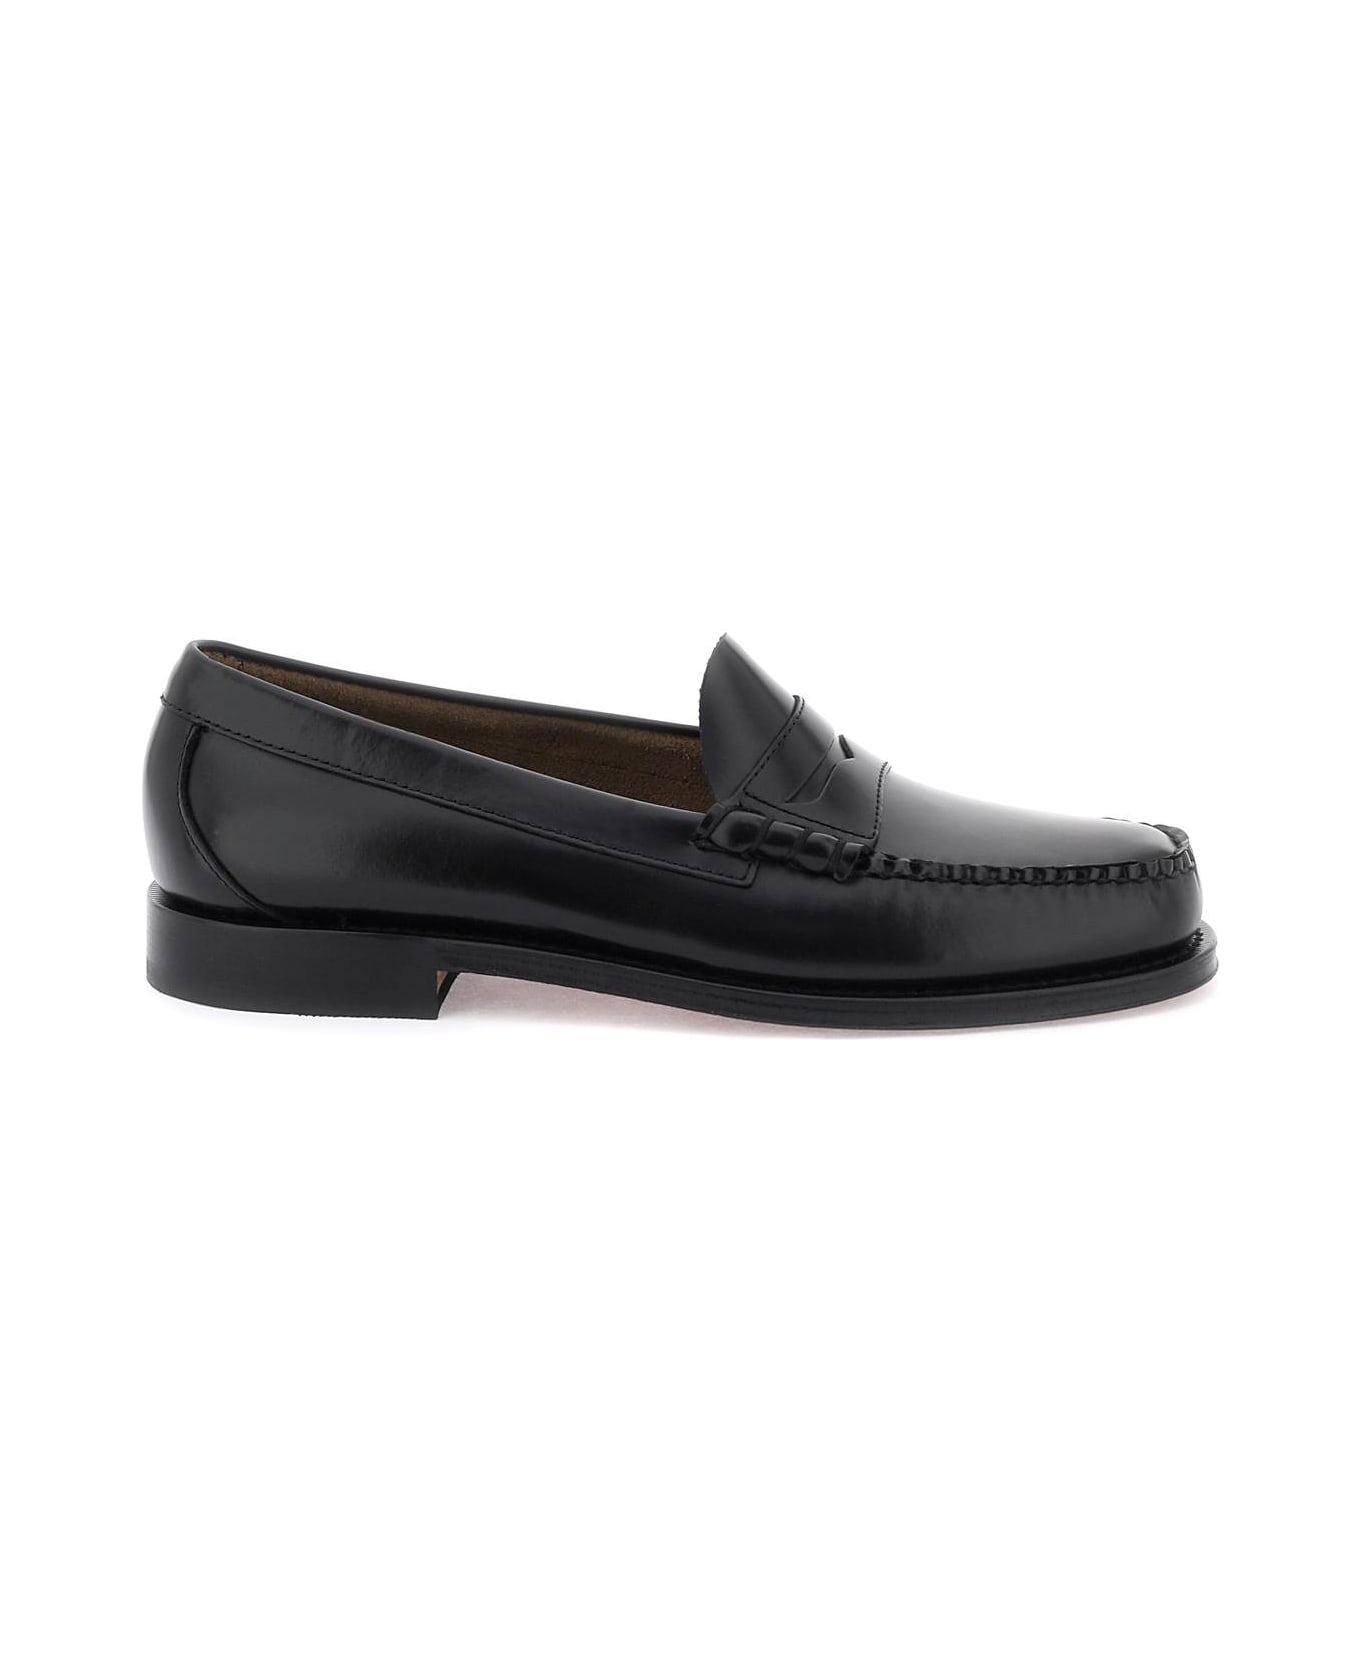 G.H.Bass & Co. 'weejuns Larson' Penny Loafers - Black